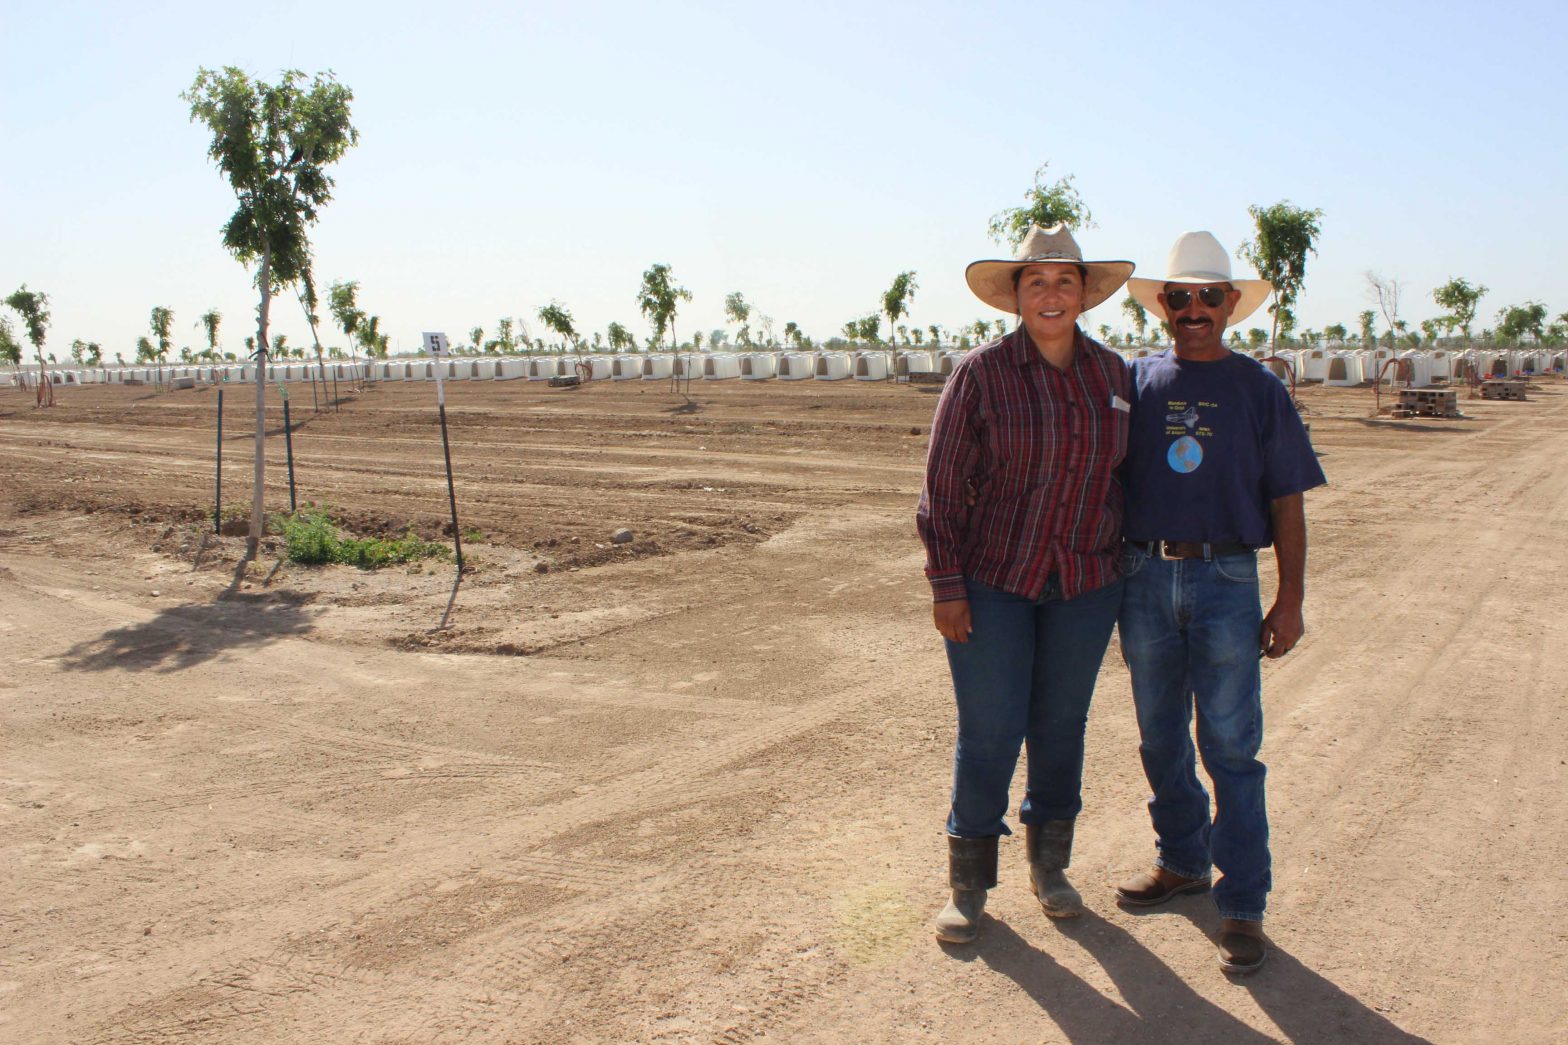 Rosa and Enrique Rodriguez work as the calf managers at T&K Red River Dairy.  The farm is located near Casa Grande, Arizona and milks about 10,400 cows.